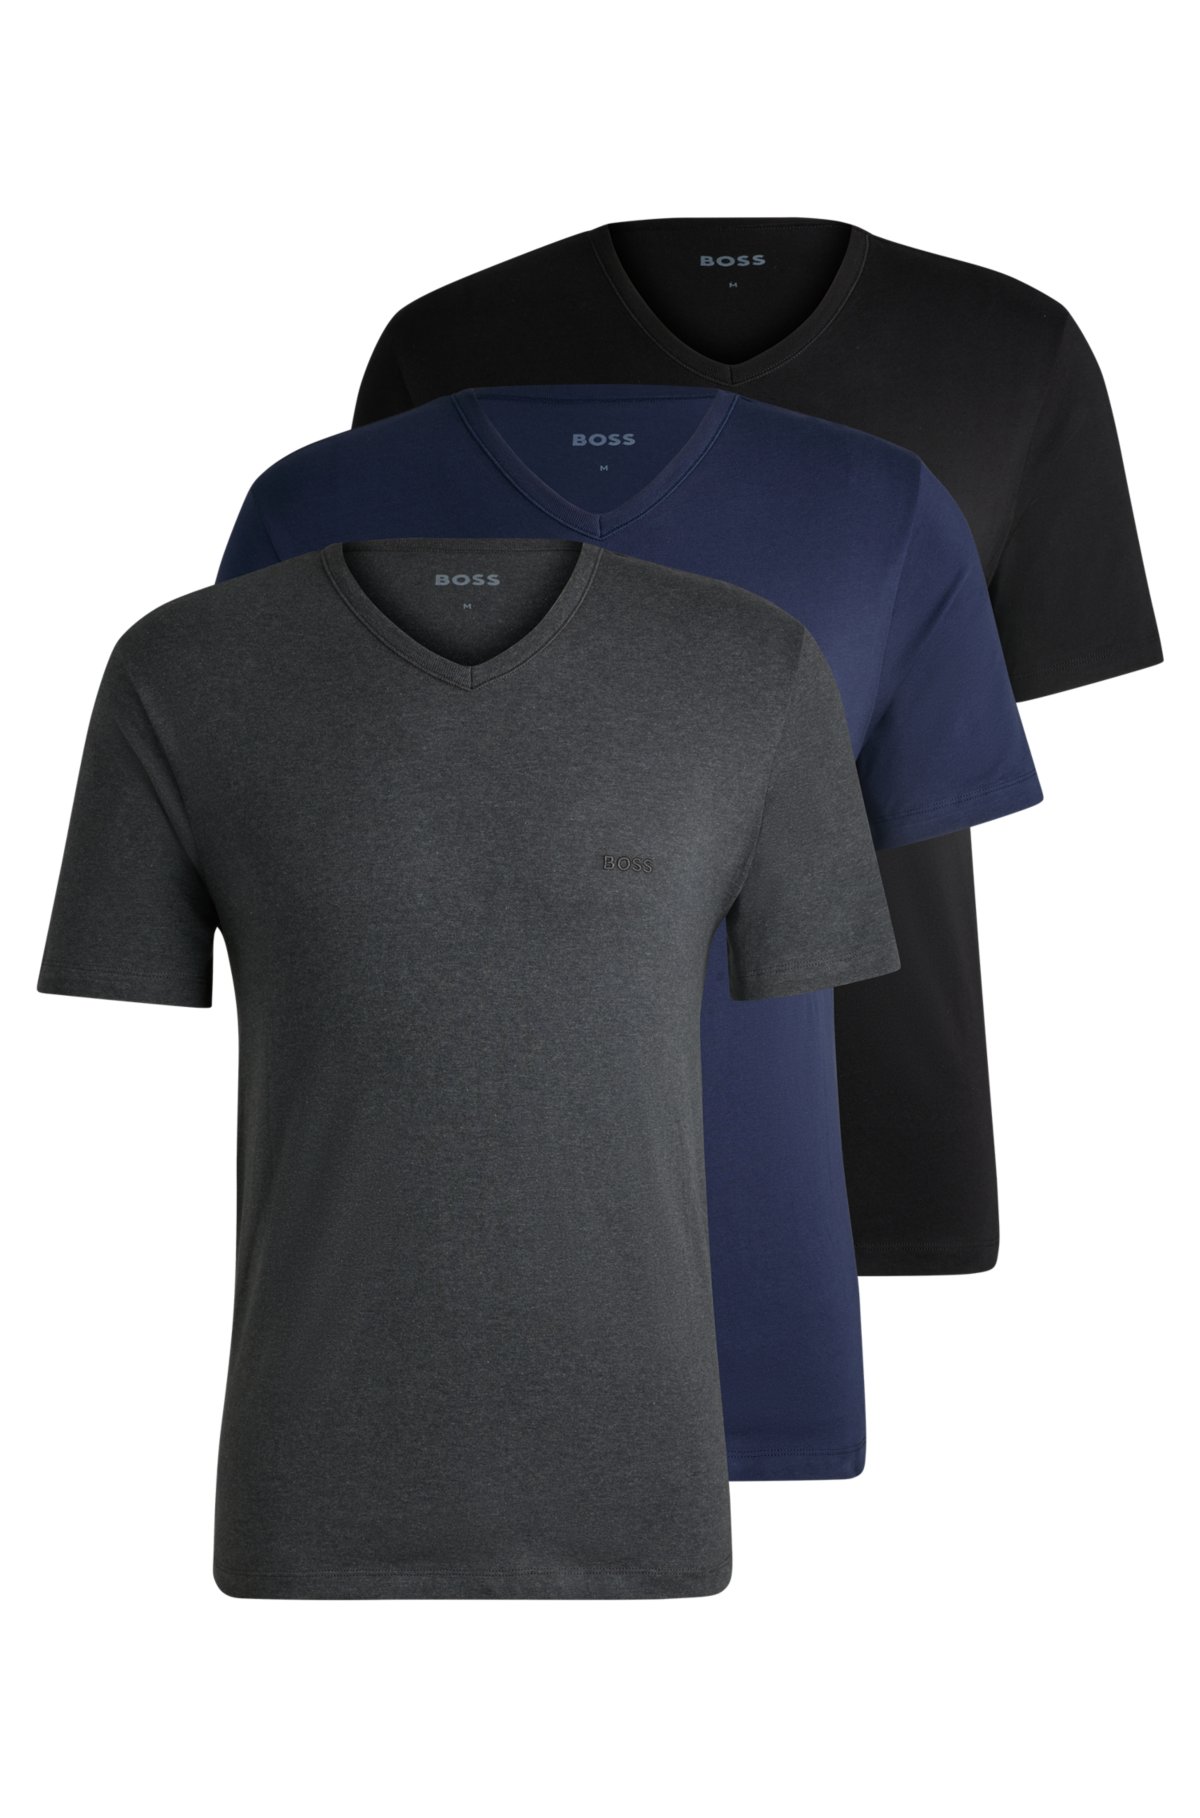 BOSS - Three-pack of V-neck T-shirts in cotton jersey